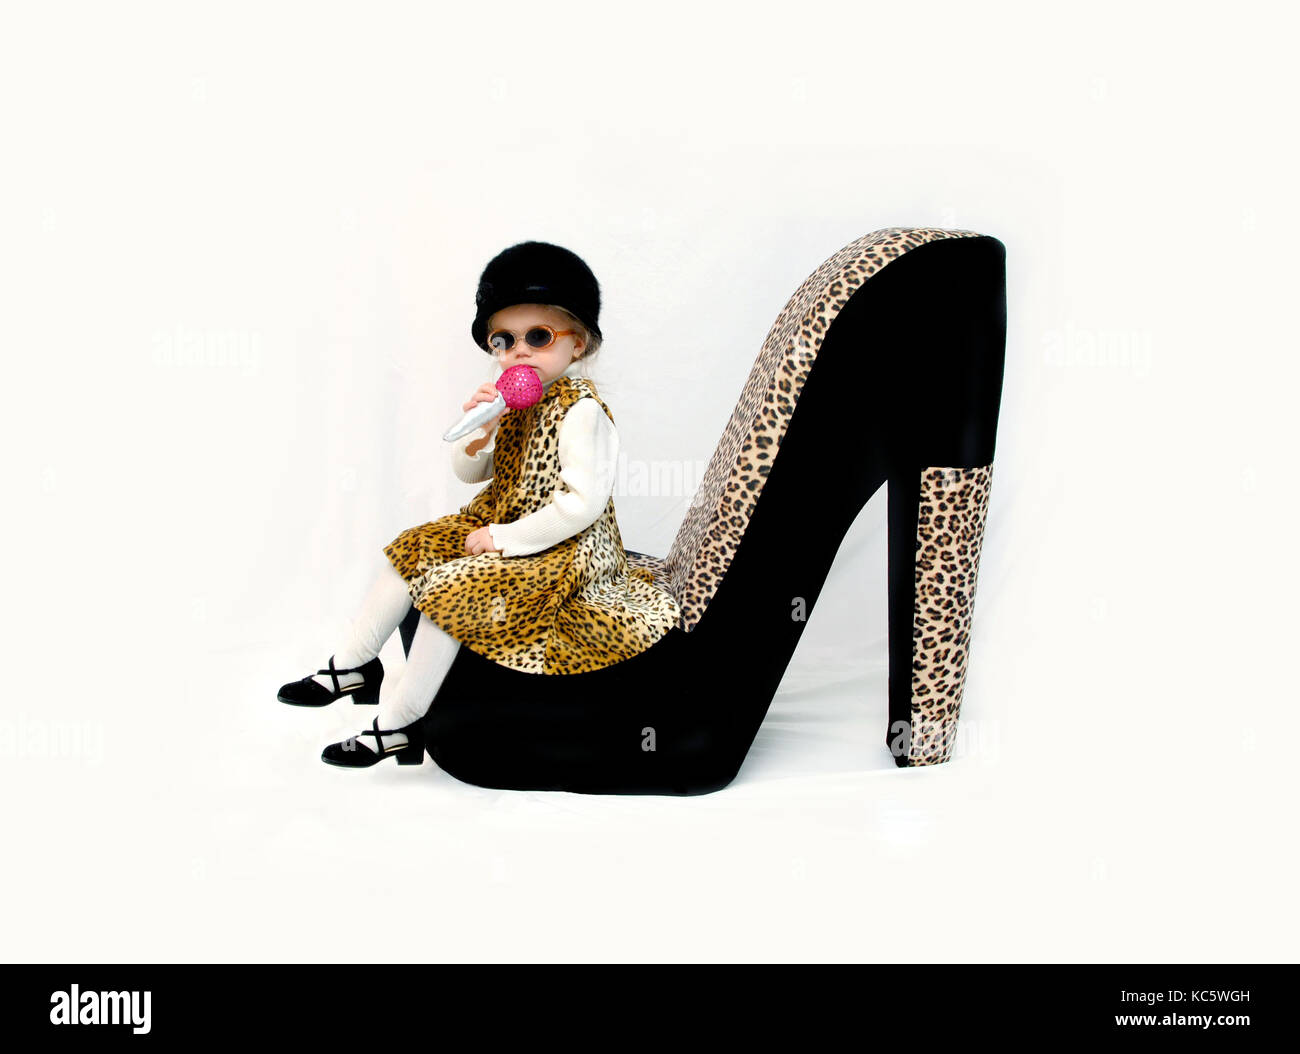 Little girl, wearing a leopard print dress and black furry hat, sings into a pretend microphone.  She is sitting on an animal print giant shoe. Stock Photo